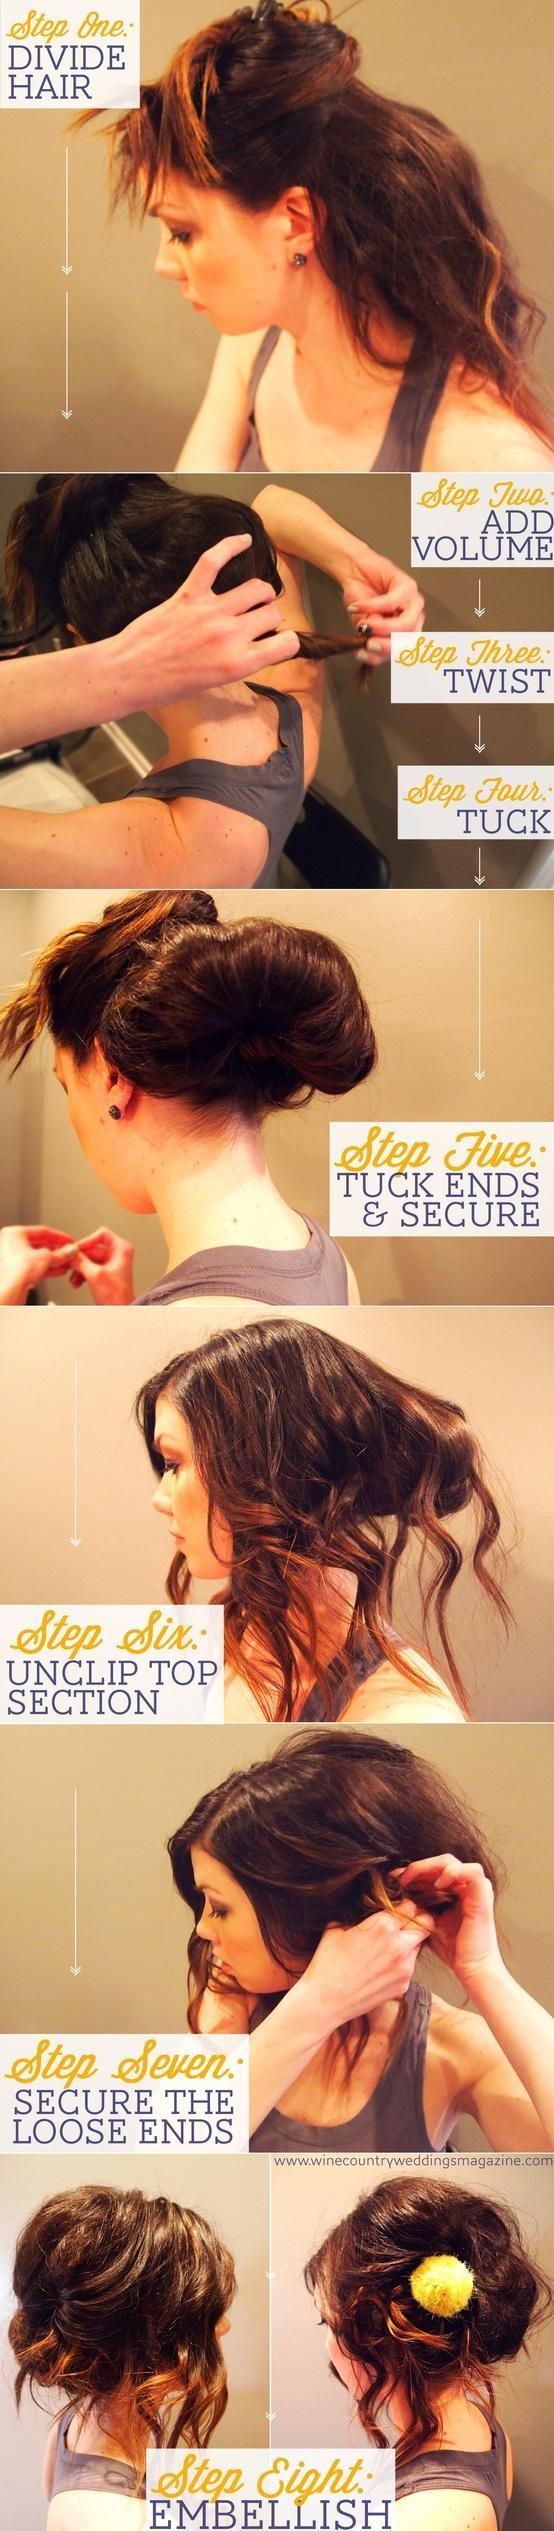 Messy updo tutorial. I like this and if I have to I'll take it to the salon